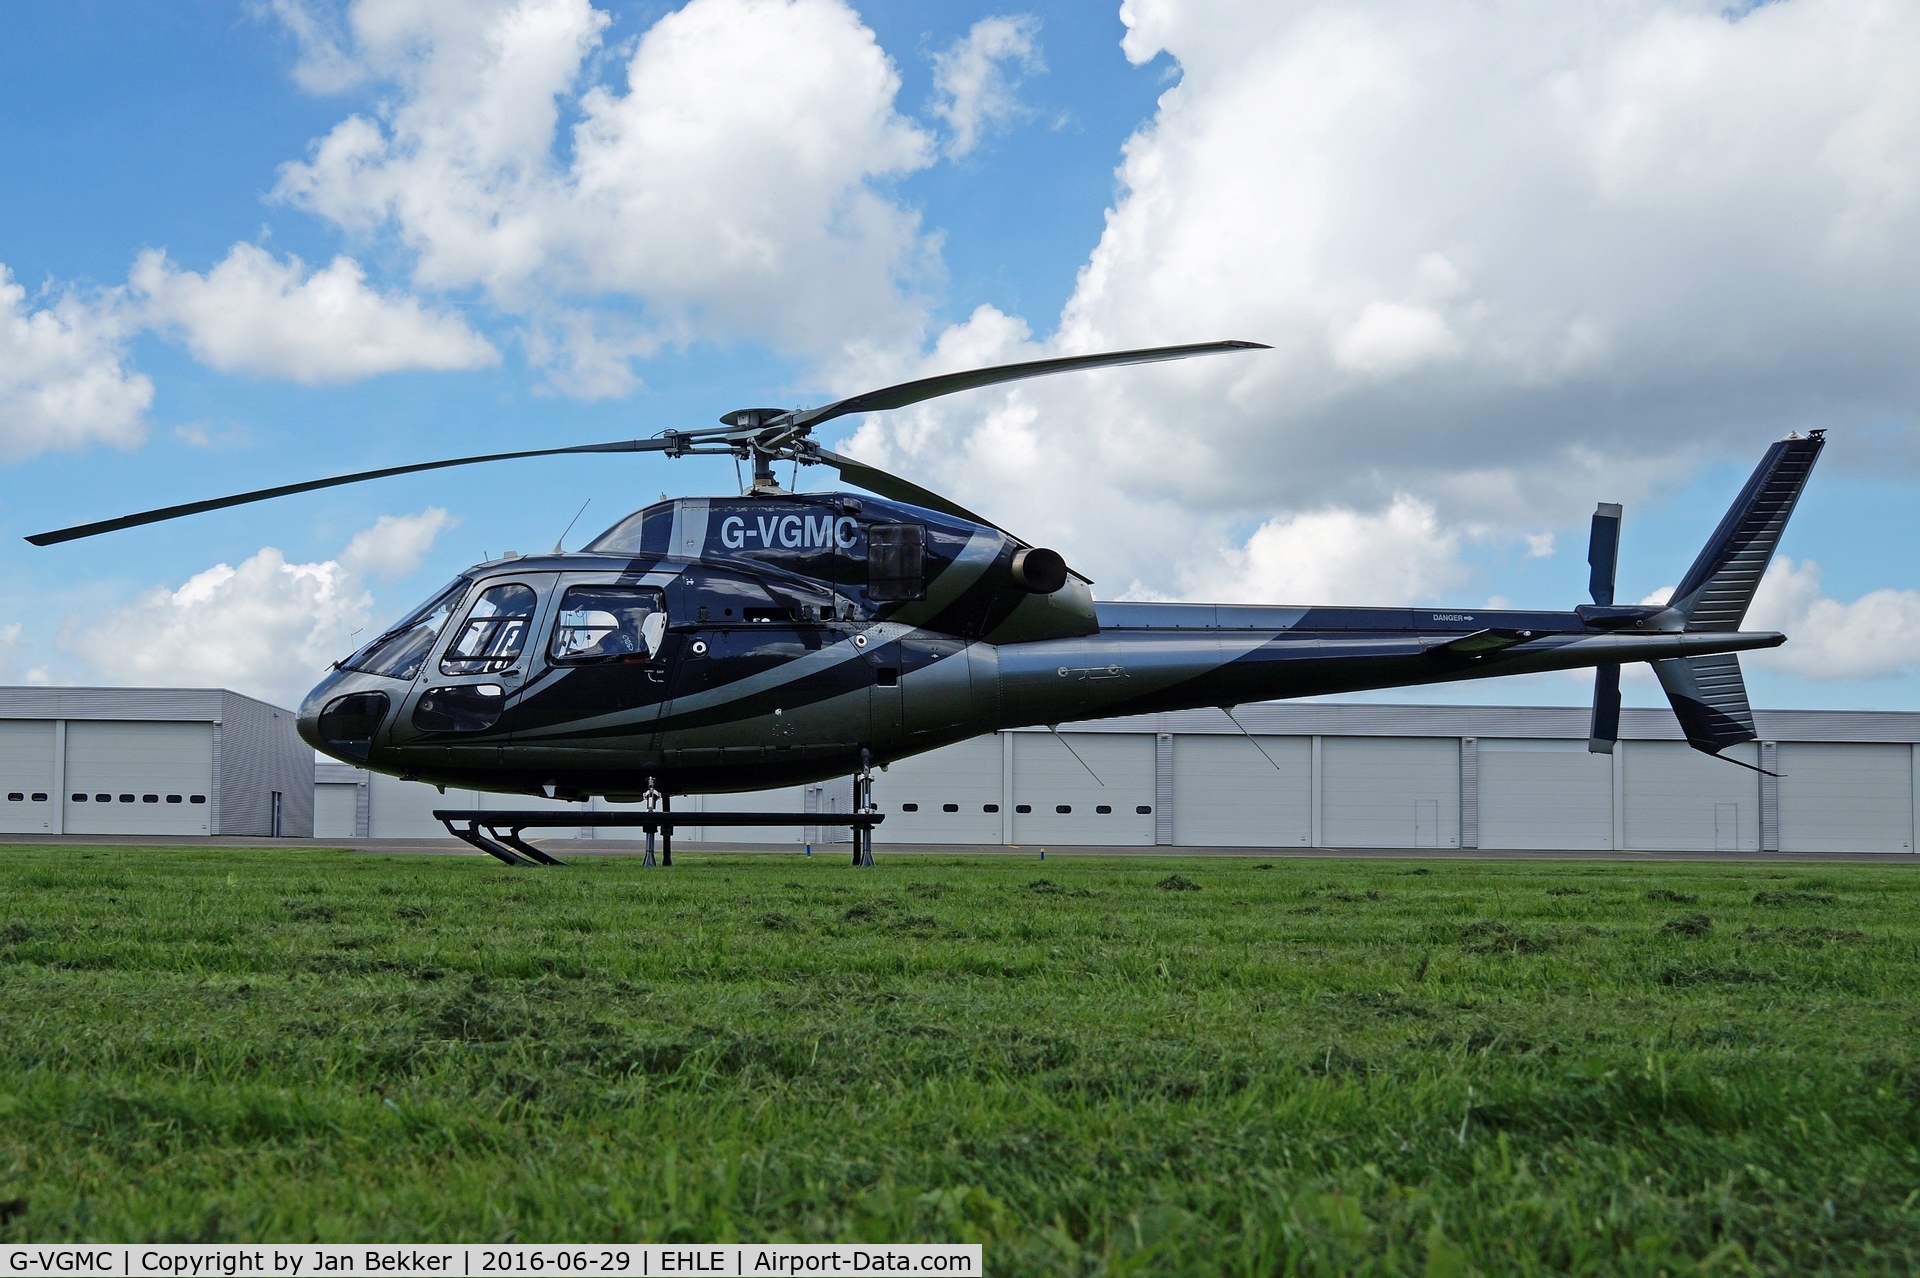 G-VGMC, 2001 Eurocopter AS-355N Ecureuil 2 C/N 5693, At Lelystad Airport for shooting the film 